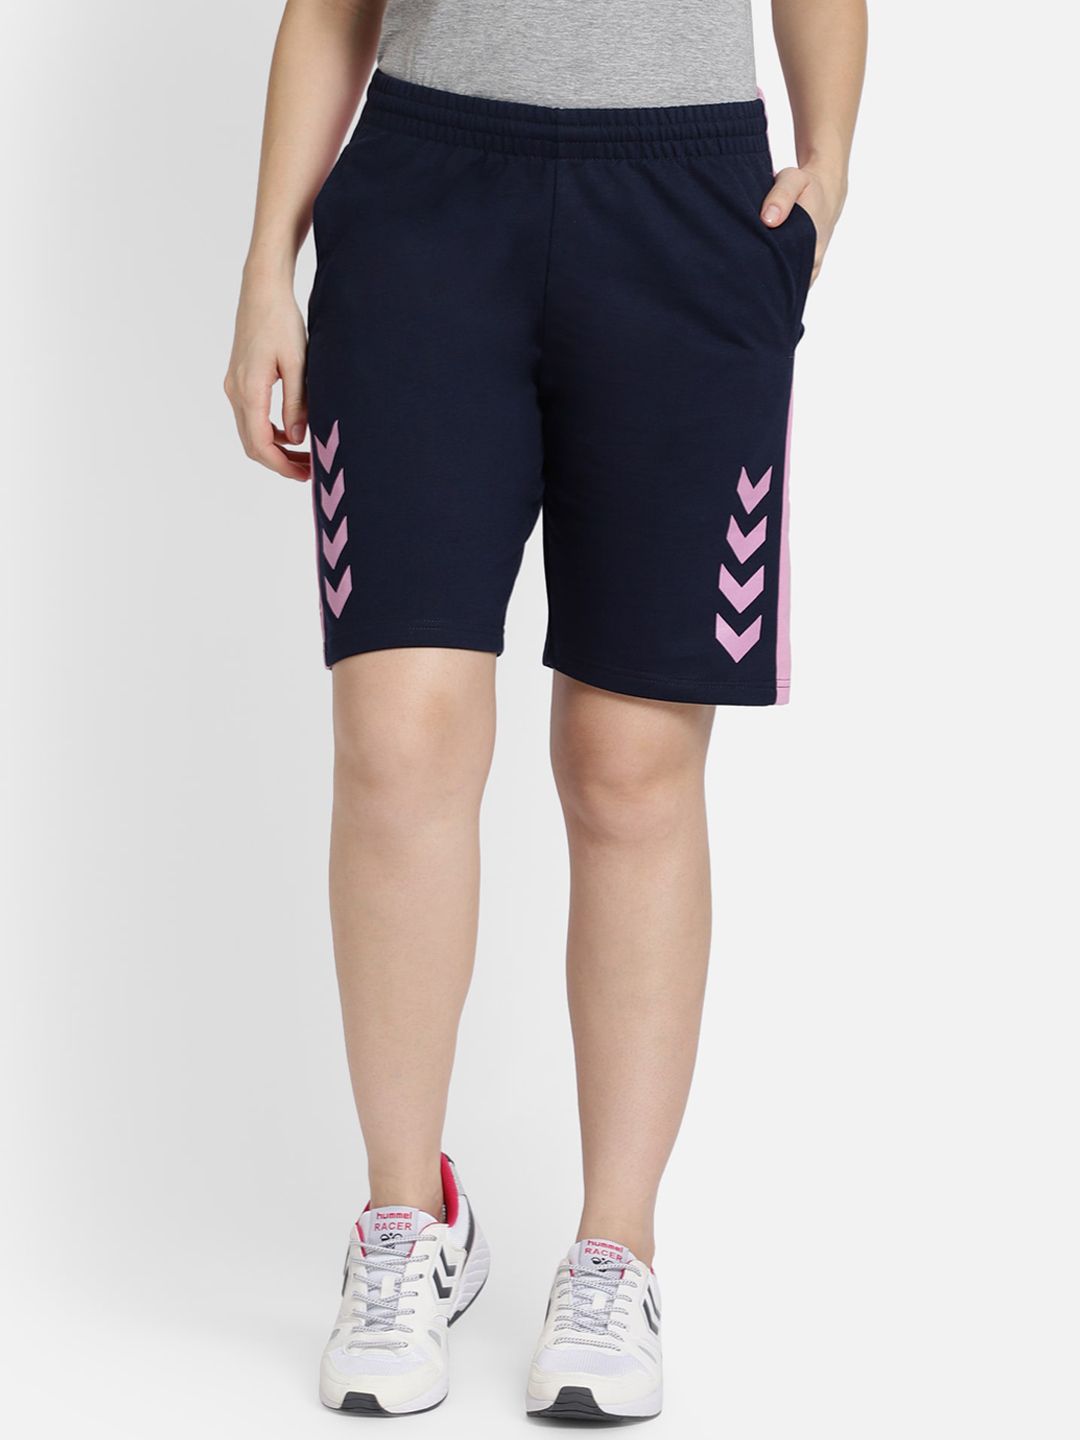 hummel Women Black Printed Action Cotton Sports Shorts Price in India